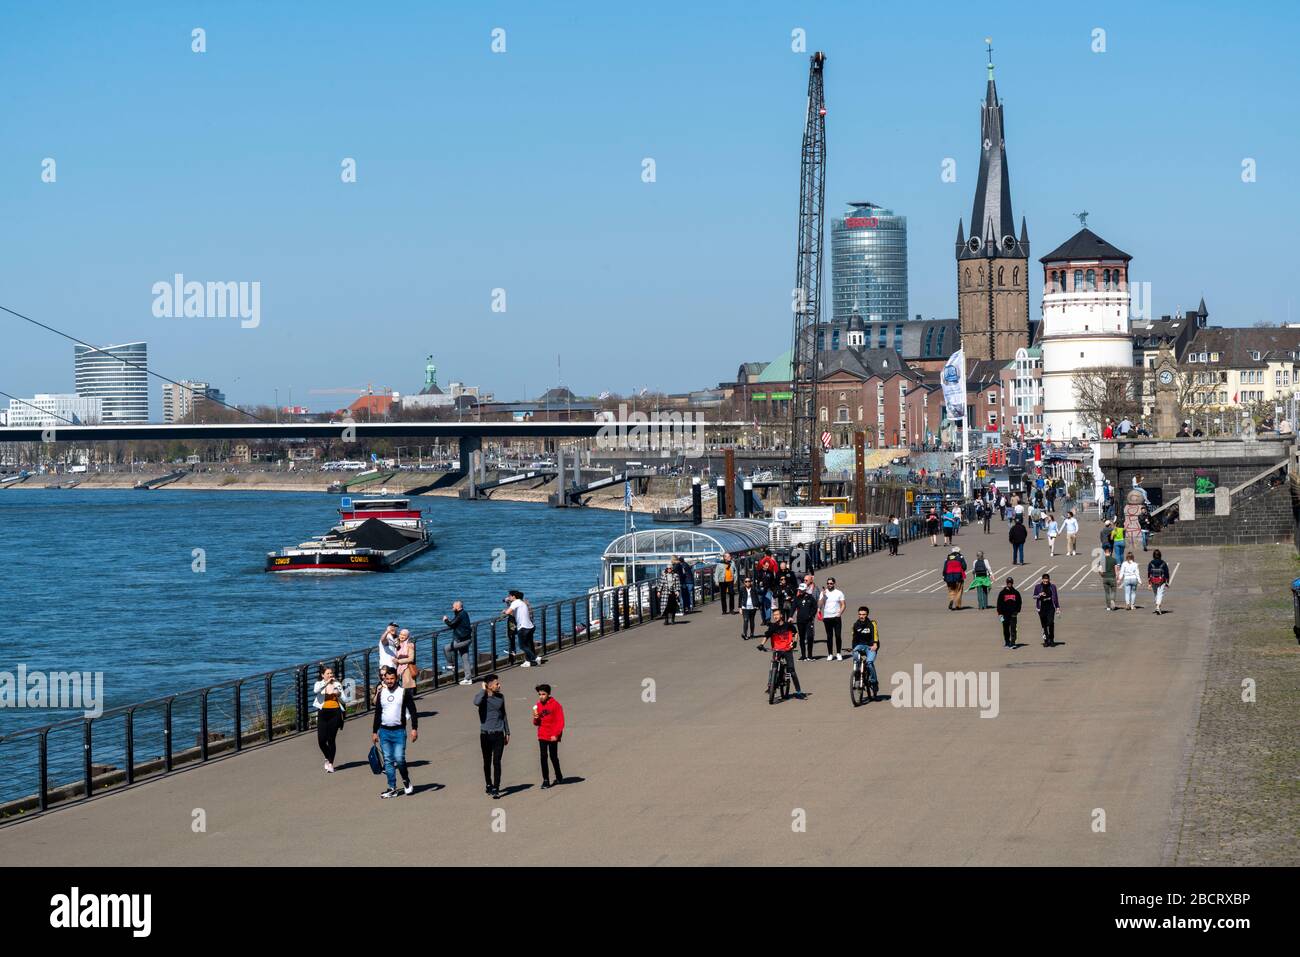 DŸsseldorf on the Rhine during the corona crisis, the ban on contact, keeping distance is mostly observed, despite many walkers in beautiful spring we Stock Photo